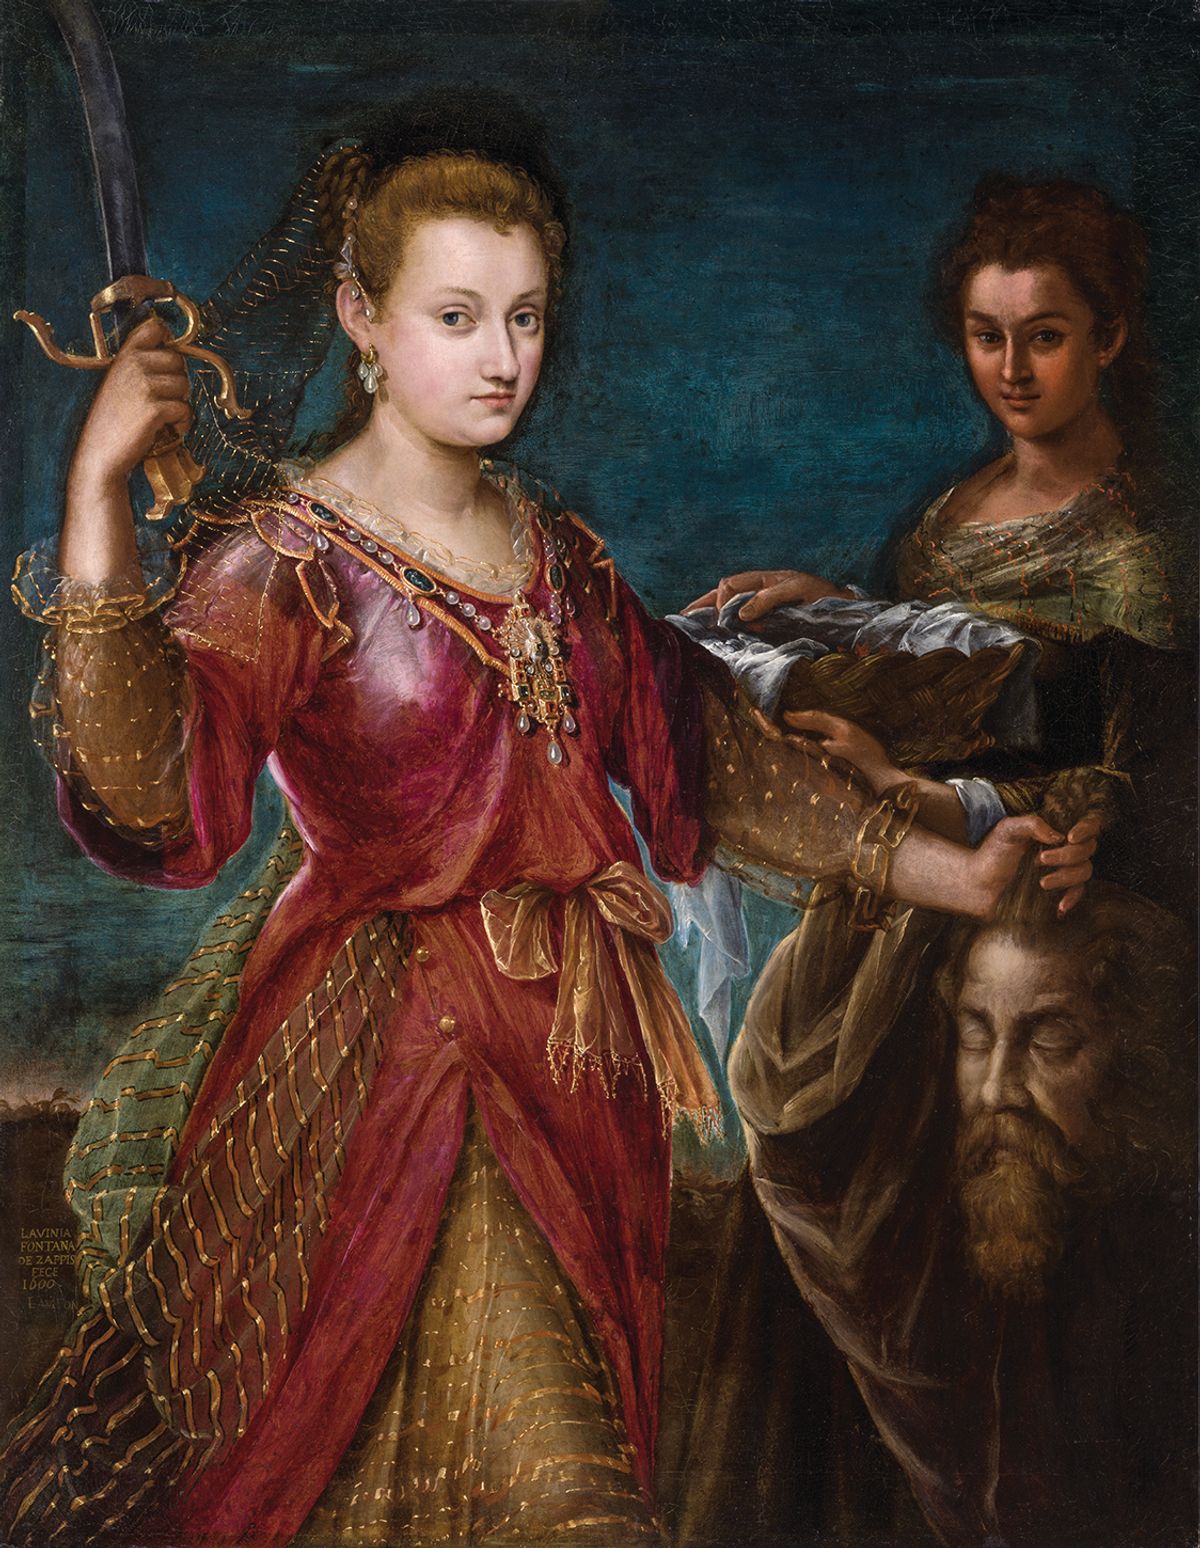 Lavinia Fontana’s Judith with the Head of Holofernes (1600) underwent a restoration especially for the exhibition that “completely changes our reading of the work” Museo Davia Bargellini, Bologna